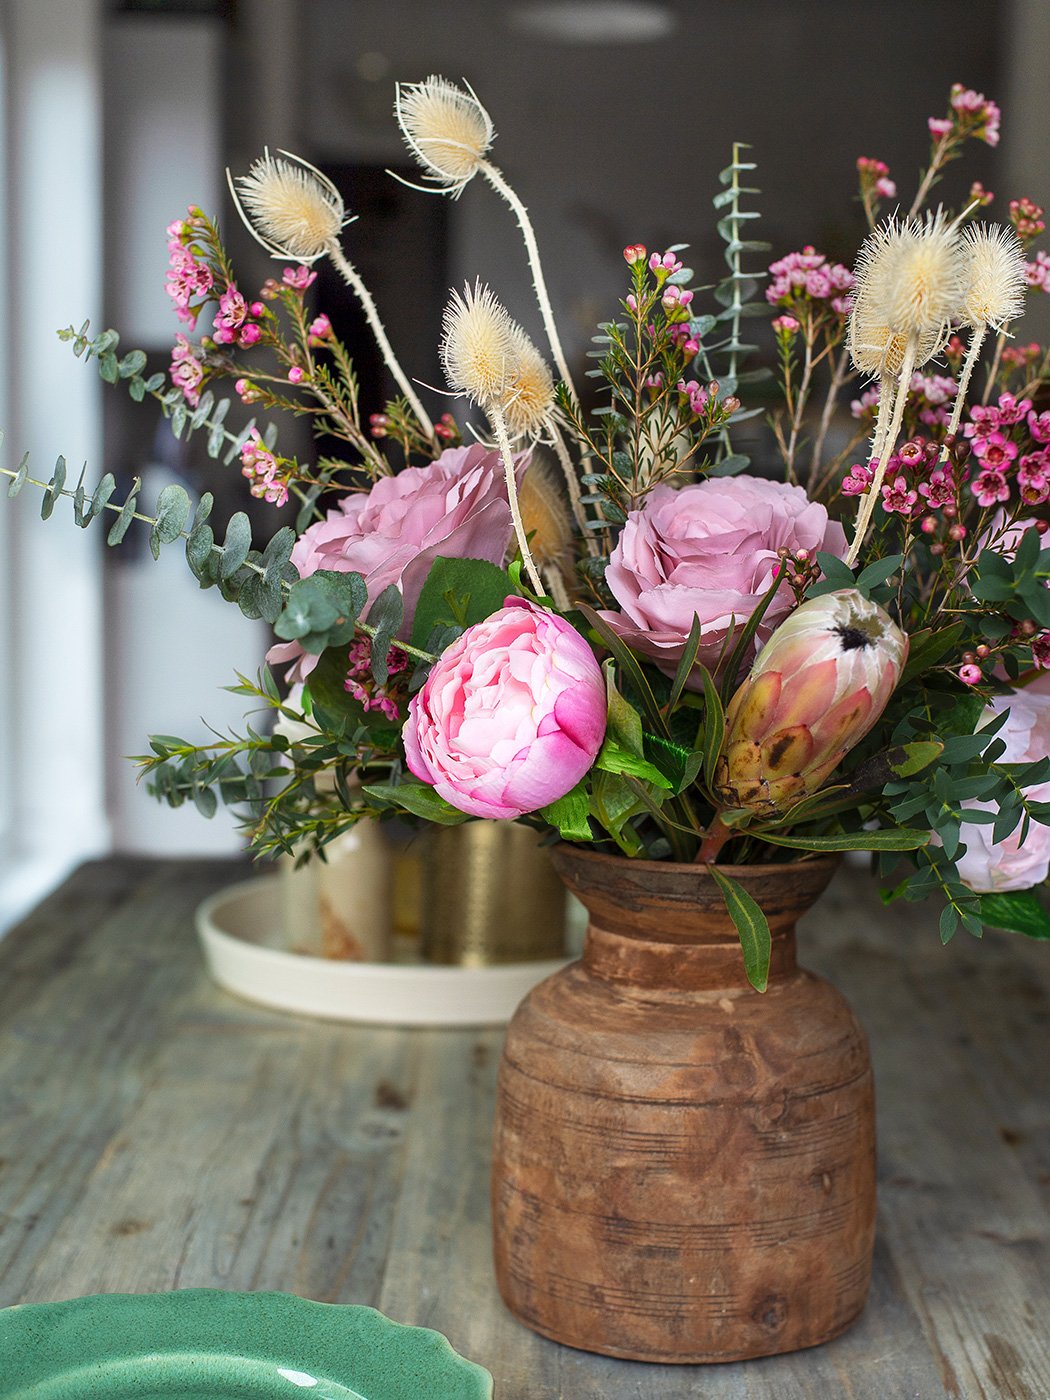 Beautiful vase of pink flowers mixed with dried flowers